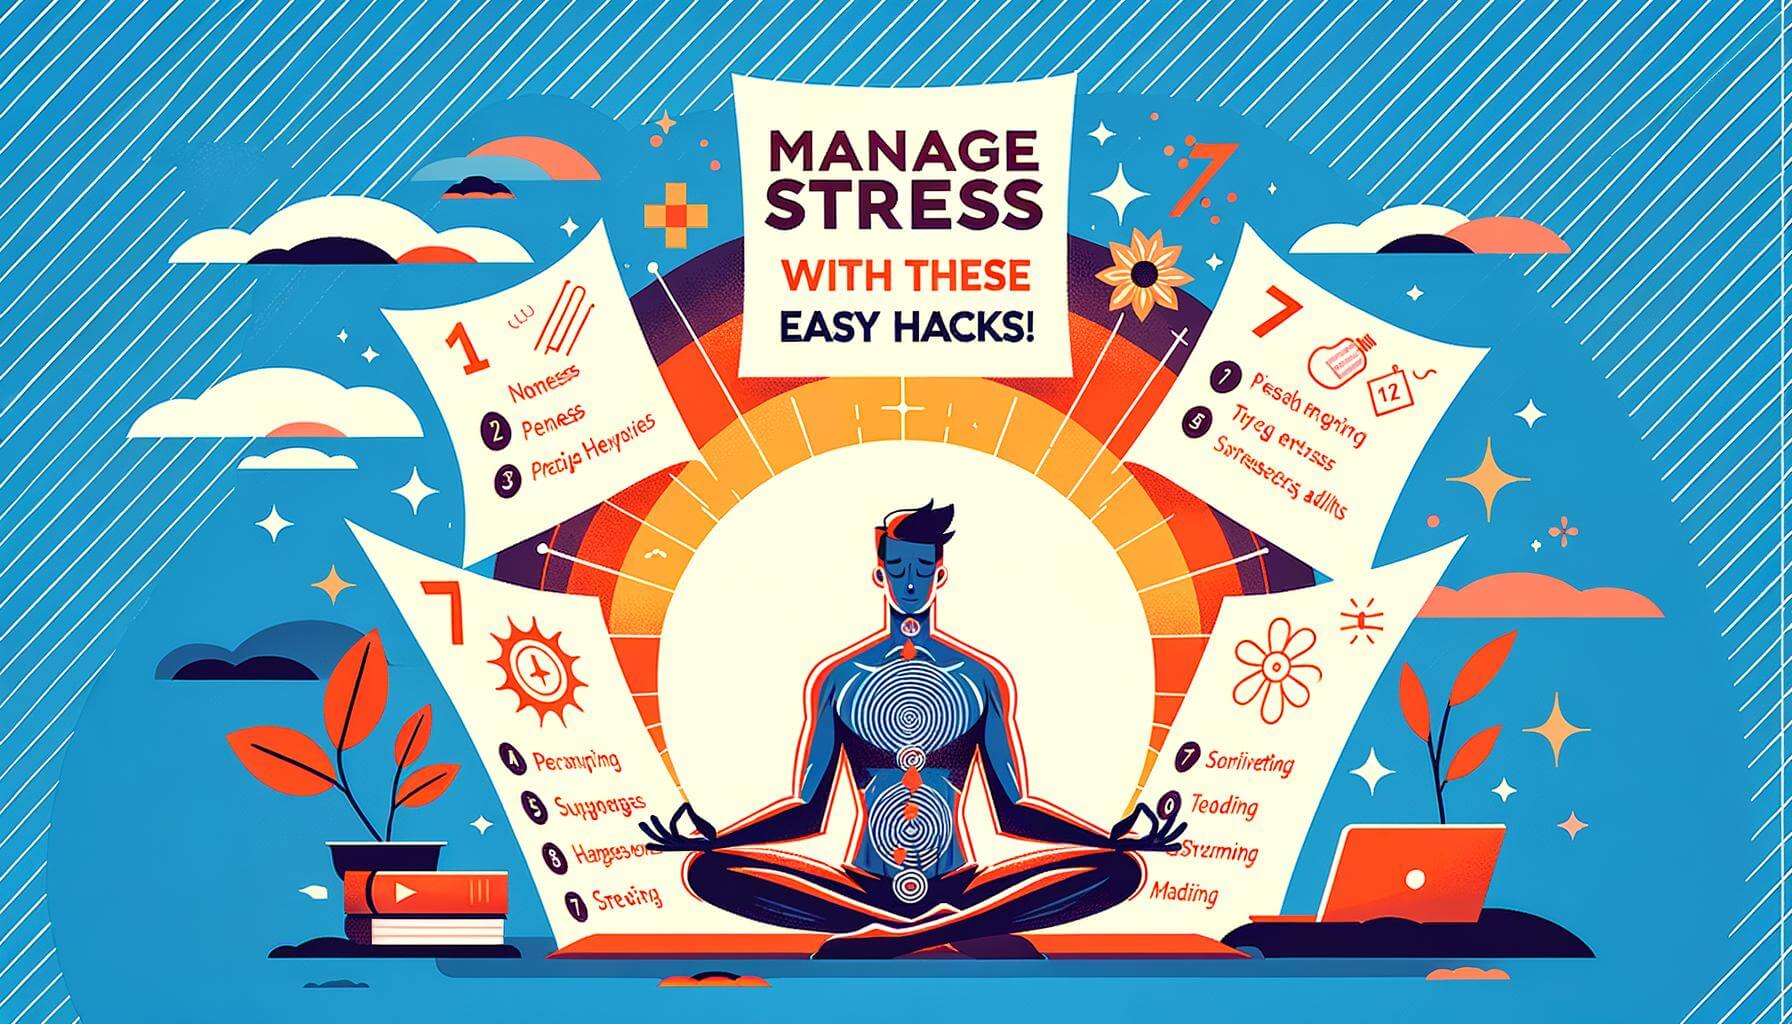 Manage stress with these 7 easy hacks!